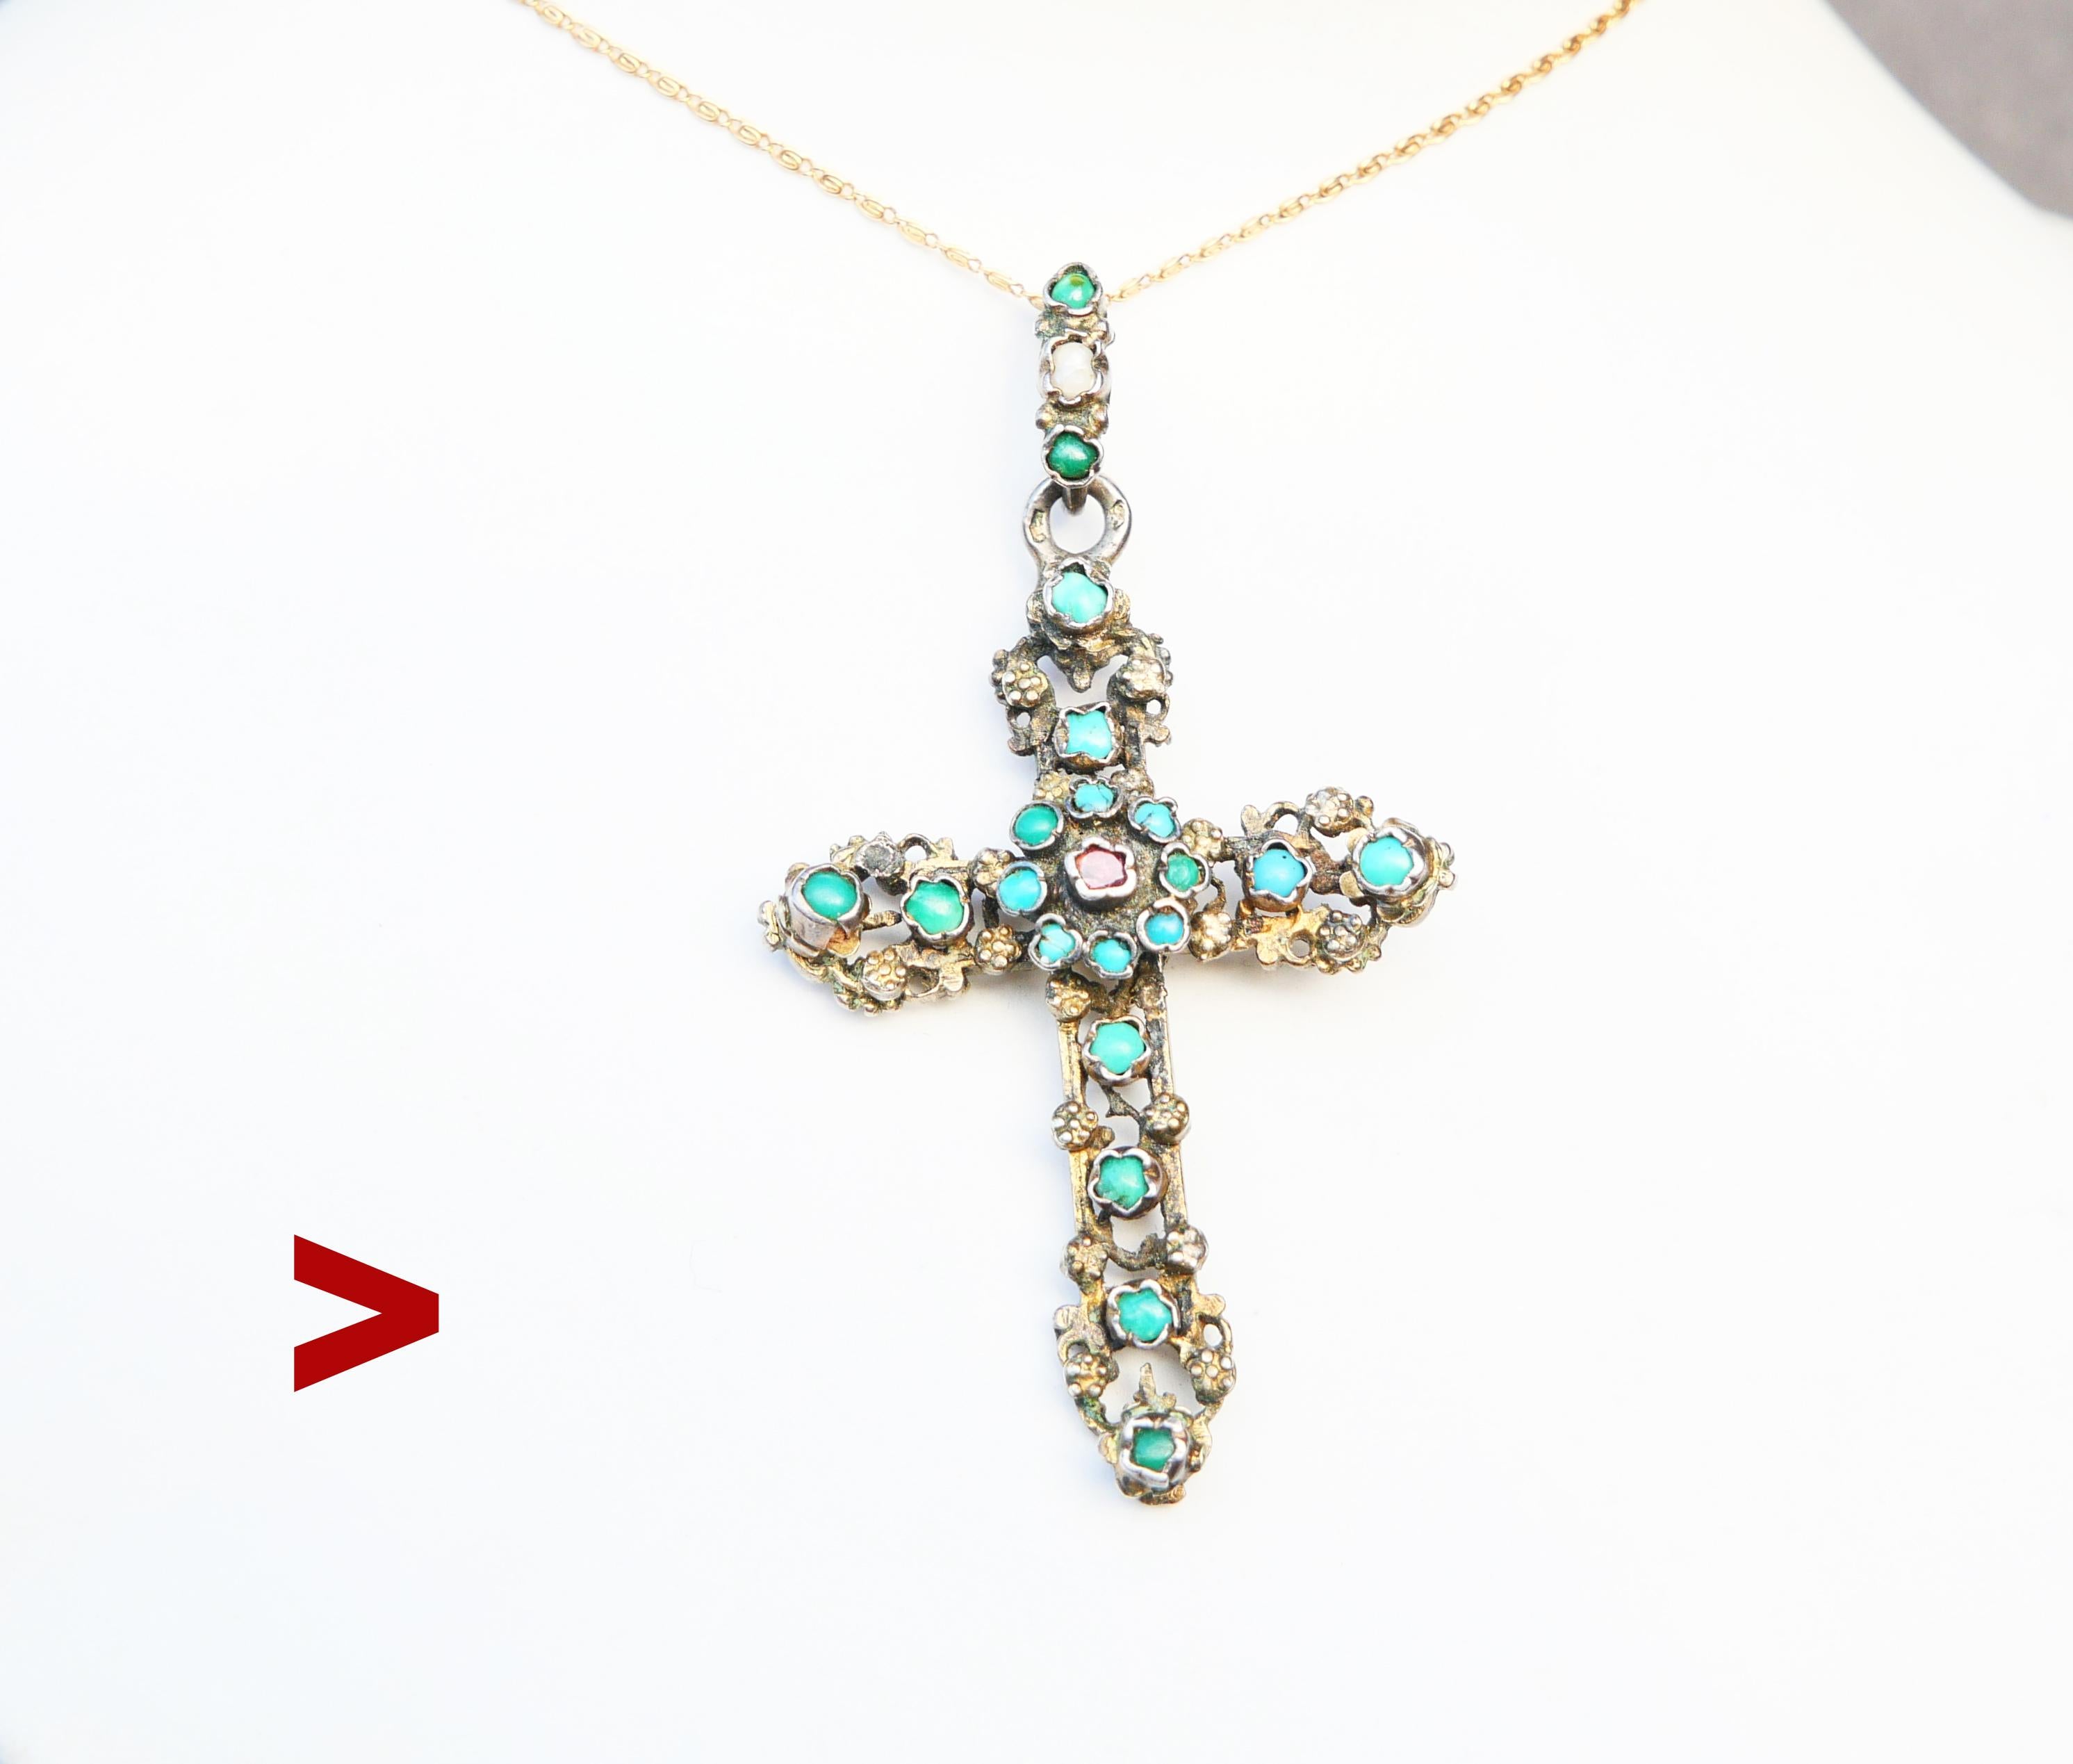 Antique Cross in guilt Silver decorated with natural blue Turquoises, one Garnets ,one natural blister Pearl and remnants of black enamel. Late period of Austrian-Hungarian Empire, bail has hallmarks used since 1866 until 1920s

This pendant Can be